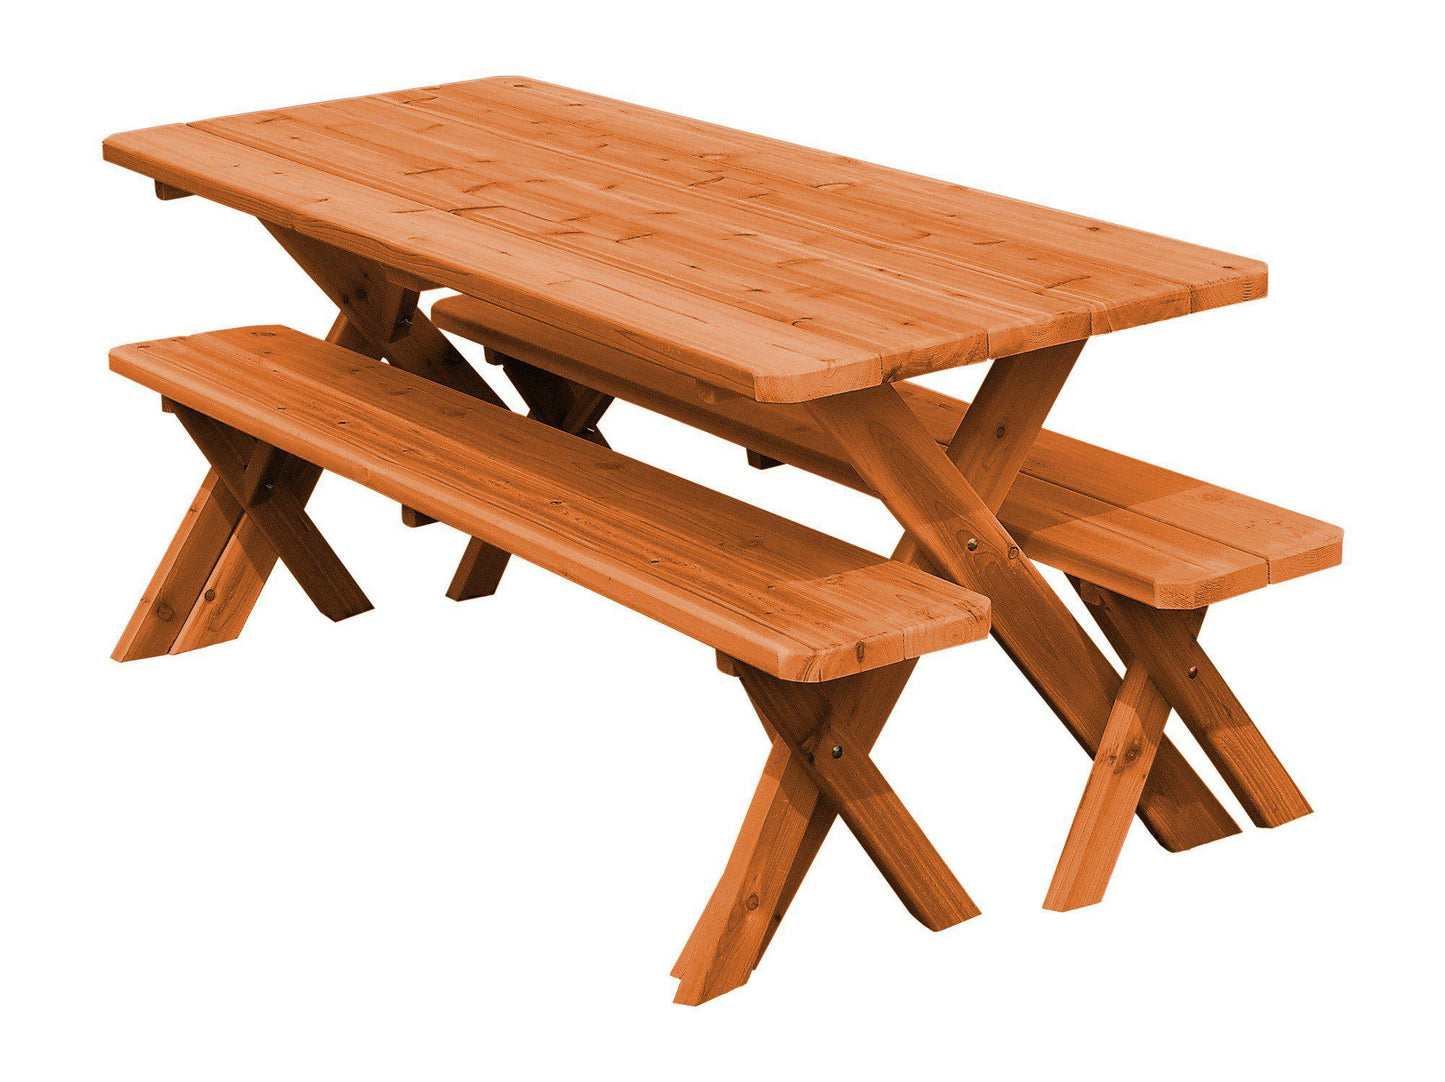 A&L FURNITURE CO. Western Red Cedar 94" Cross-leg Table w/2 Benches - Specify for FREE 2" Umbrella Hole - LEAD TIME TO SHIP 4 WEEKS OR LESS